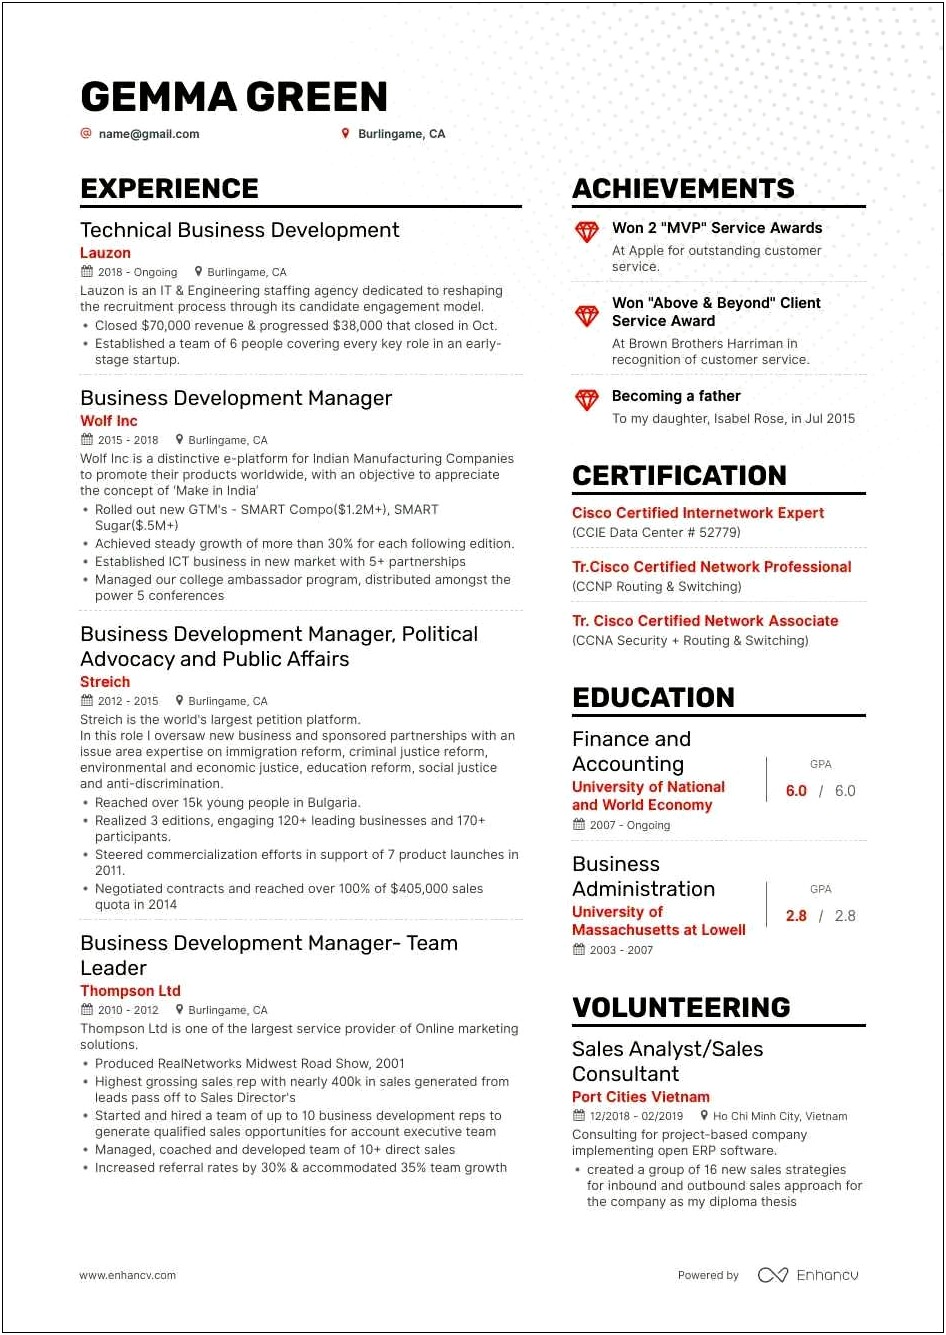 Business Development Manager Resume Objective